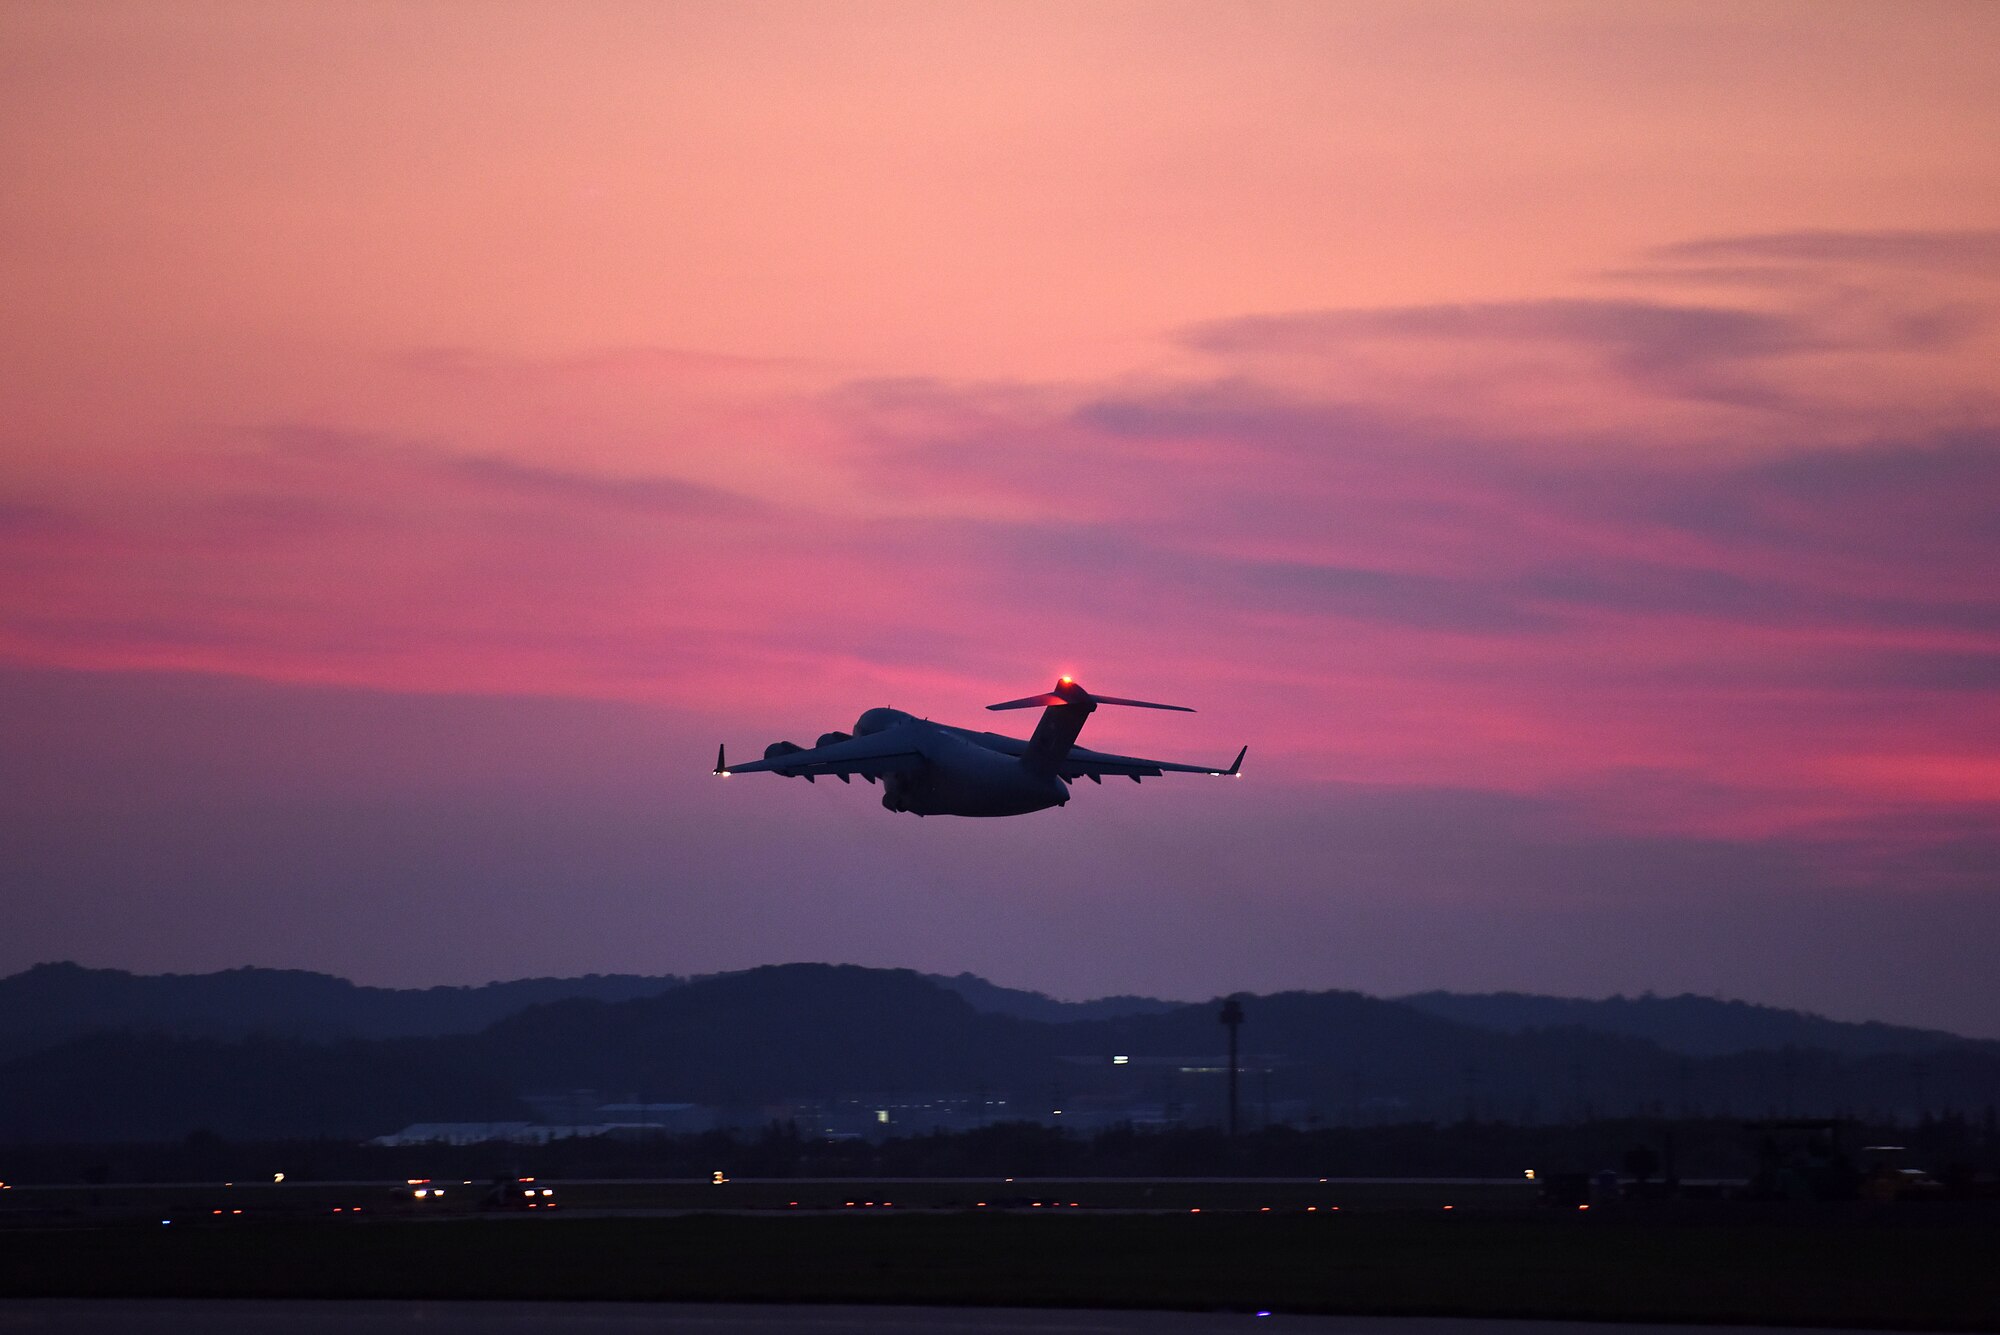 A C-17 Globemaster III, carrying dignified transfer cases containing fallen service members, takes off from Osan Air Base, South Korea, Aug. 1, 2018, en route to Joint Base Pearl Harbor-Hickam, Hawaii, where members of the Defense POW Accounting Agency will attempt to identify the remains. The remains of 55 cases were repatriated from North Korea. (U.S. Air Force photo by Senior Airman Kelsey Tucker)